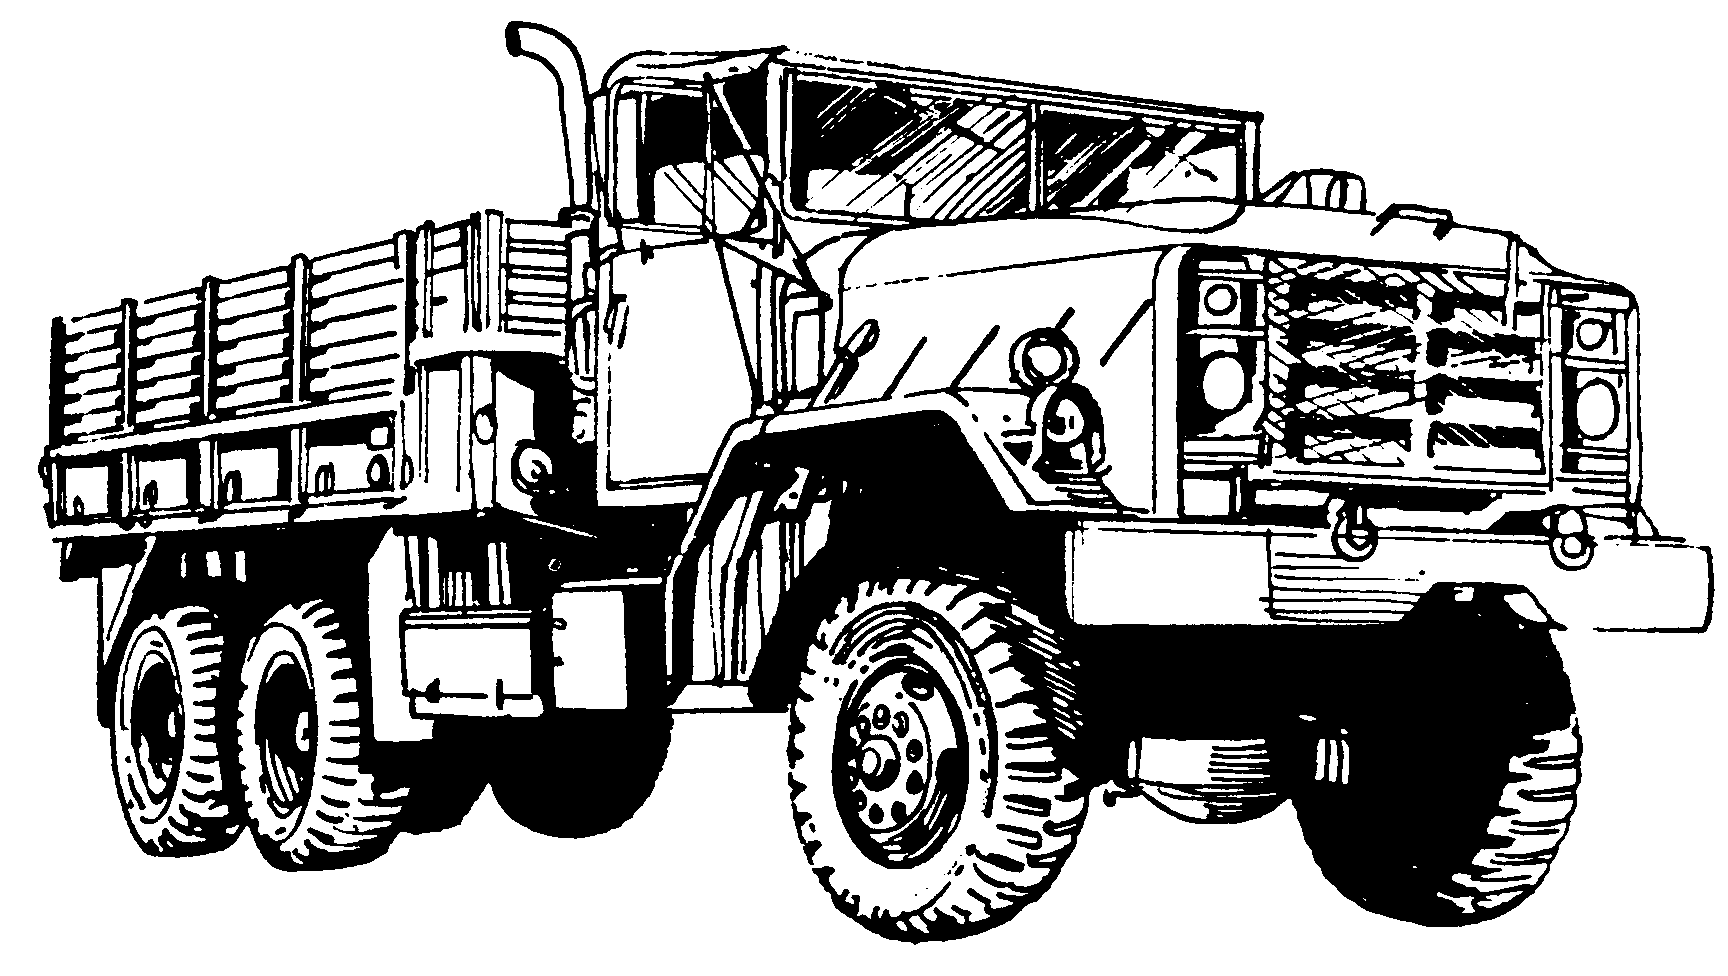 Military Vehicle Equipment Data Tables Illustrated